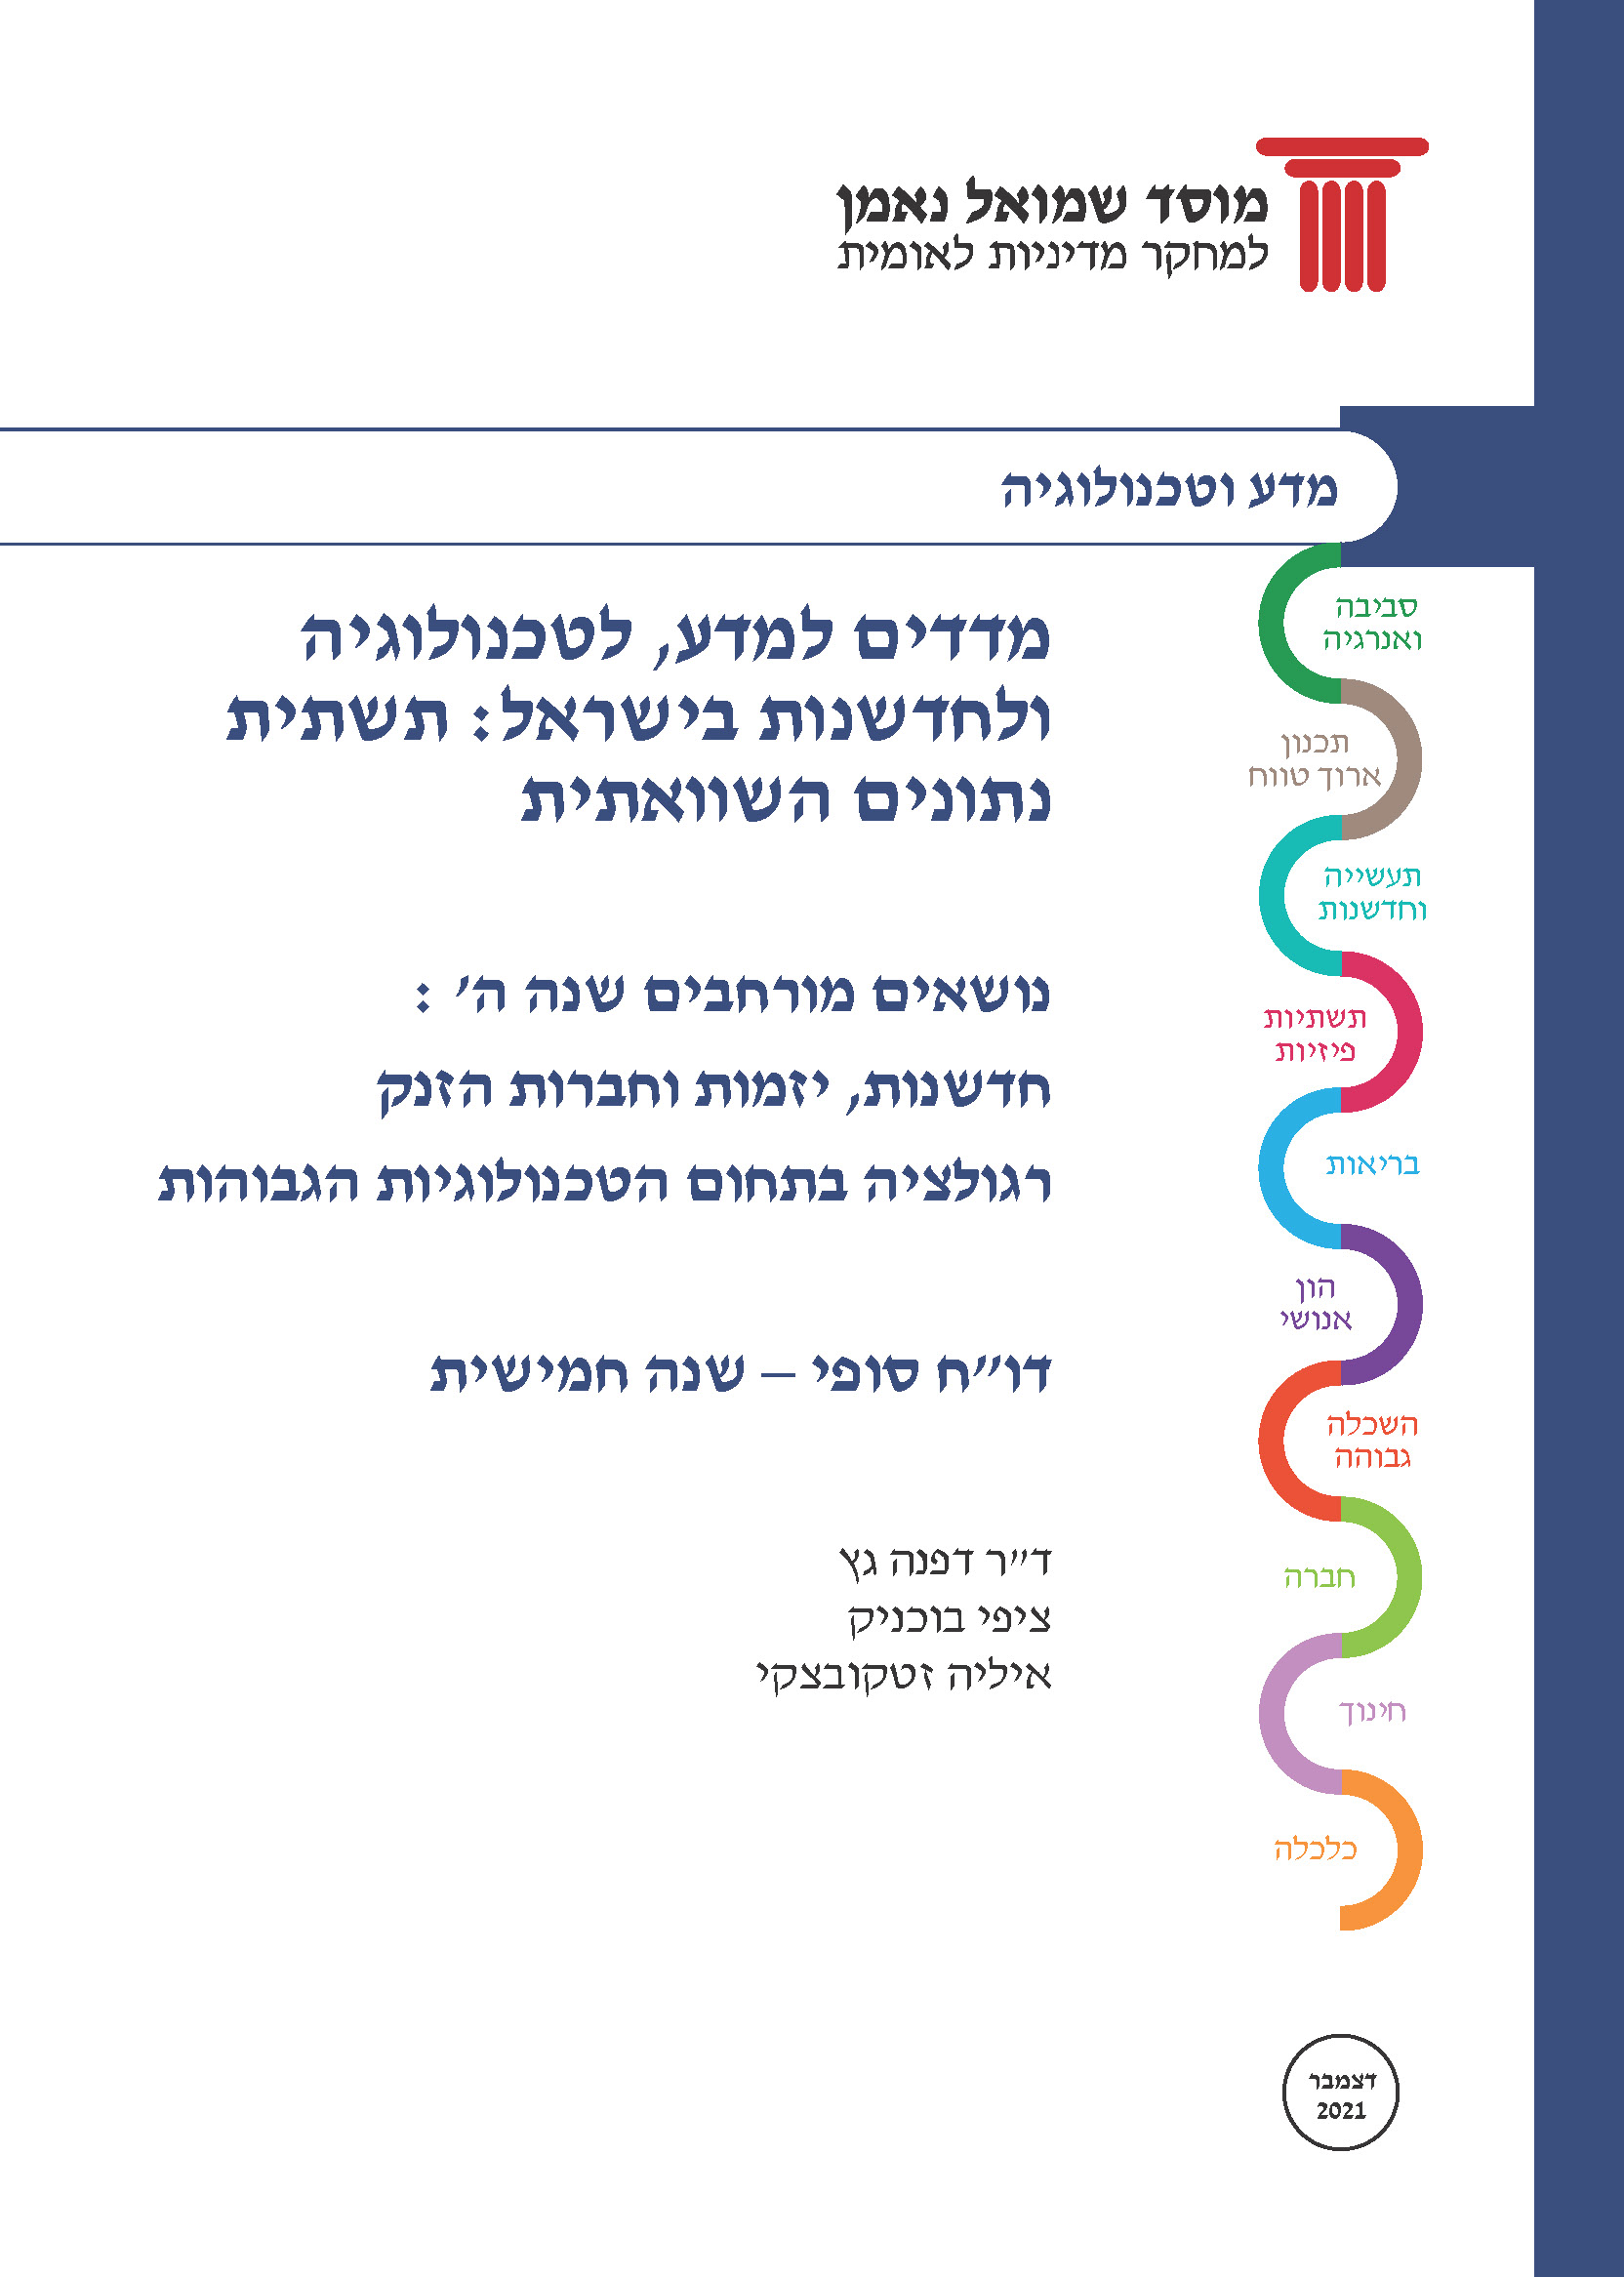 Science, Technology and Innovation Indicators in Israel: An International Comparison -2021 – part B